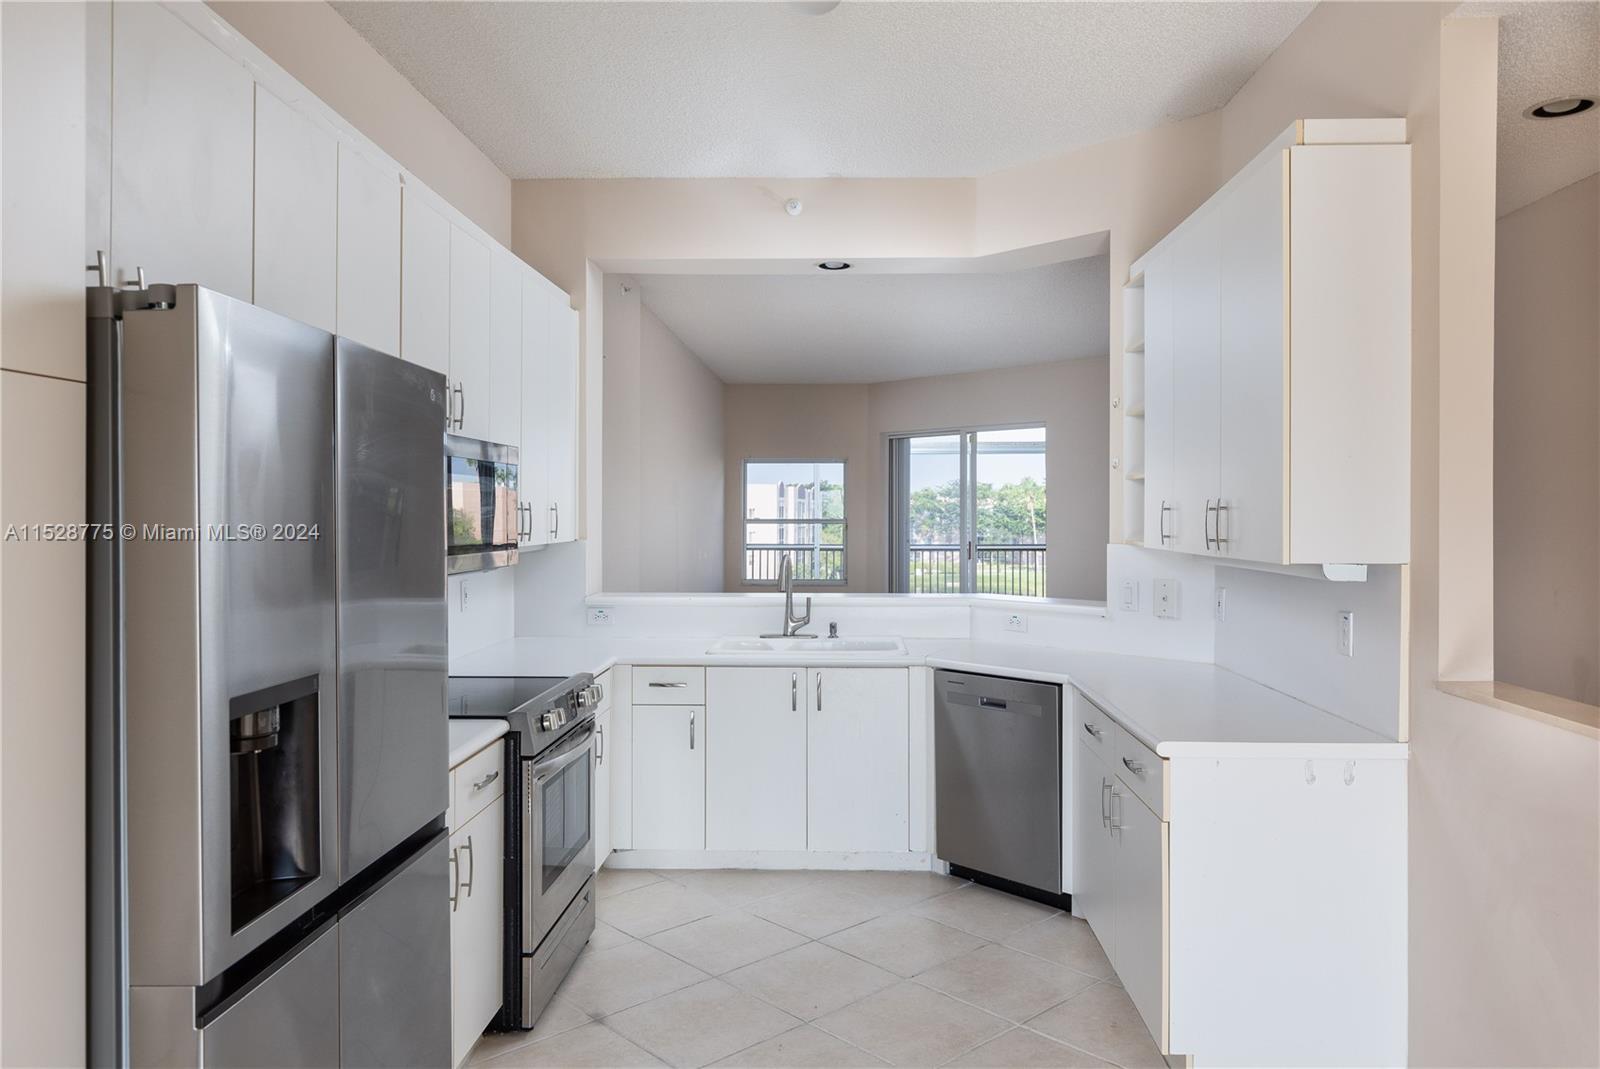 a large kitchen with stainless steel appliances lots of white cabinets